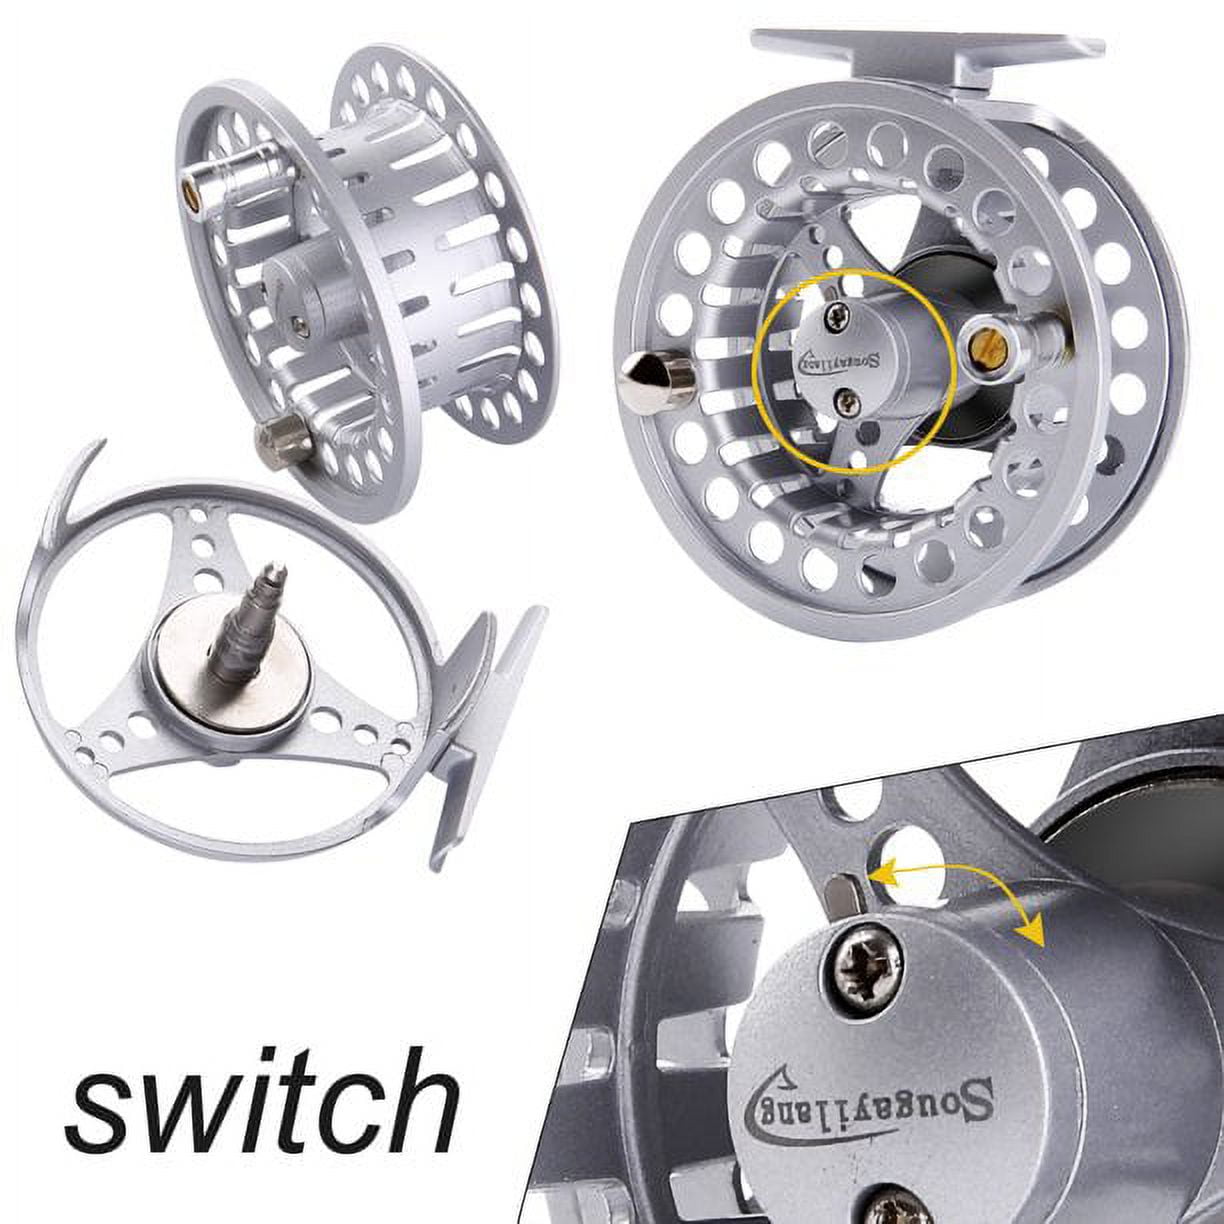 Sougayilang Fly Fishing Reel Ultralight Anti-Oxidation,CNC-machined  Aluminum Alloy Body and Spool fly fishing reels size 5/6,7/8